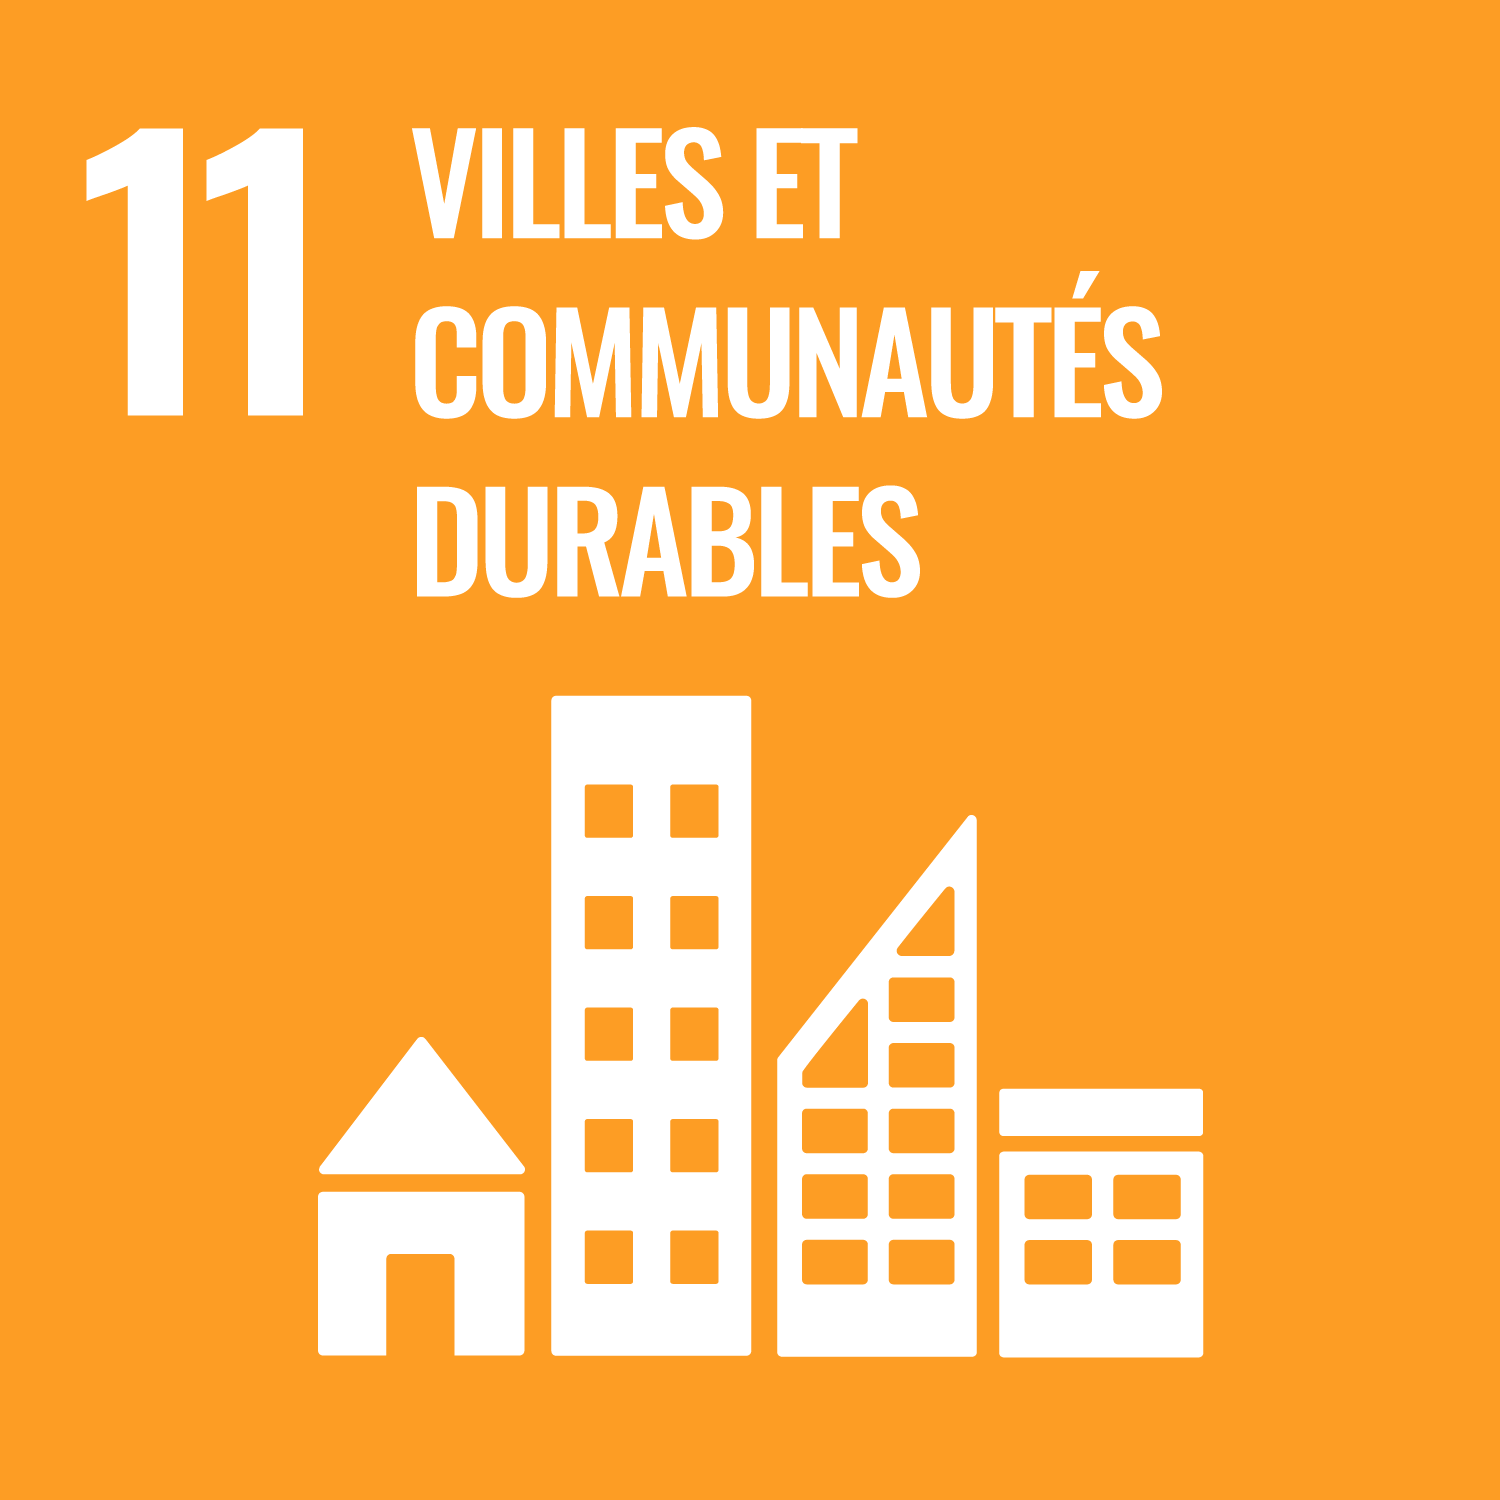 11 - SUSTAINABLE CITIES AND COMMUNITIES